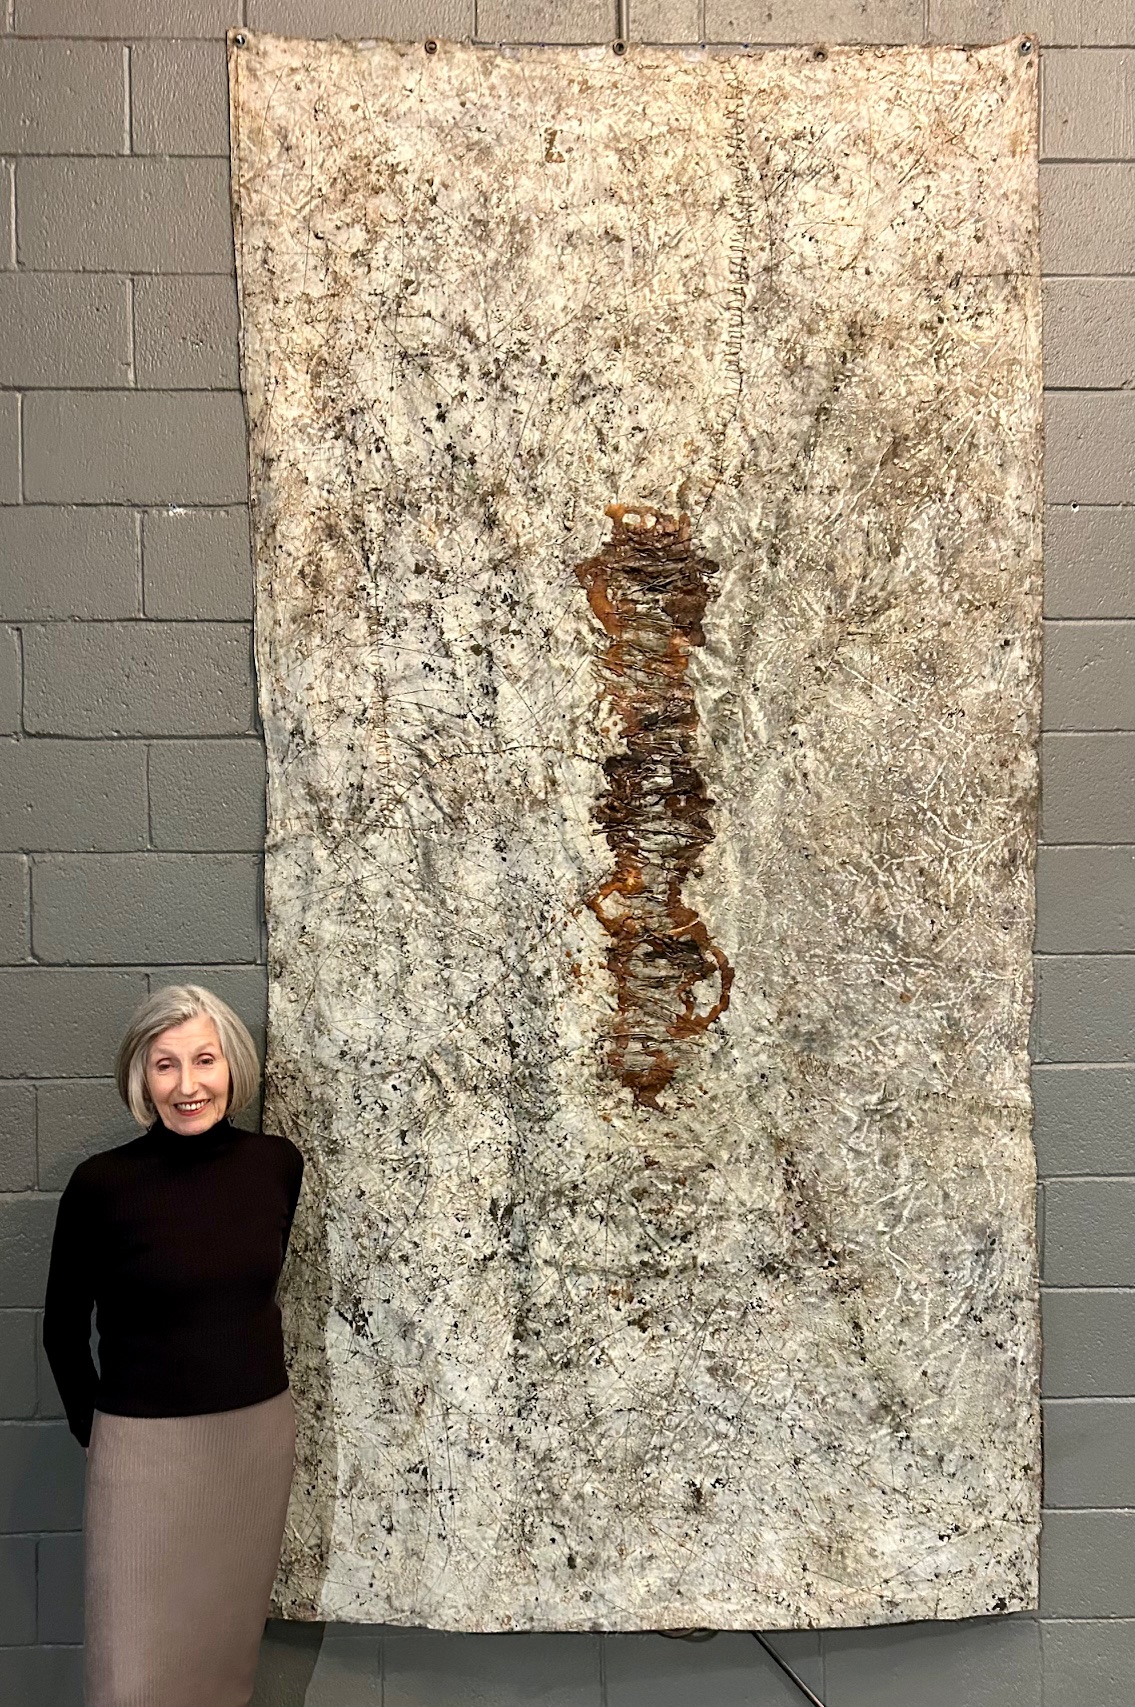 Rose Marie Prins standing next to her painting, “Her Lair: The Topography”